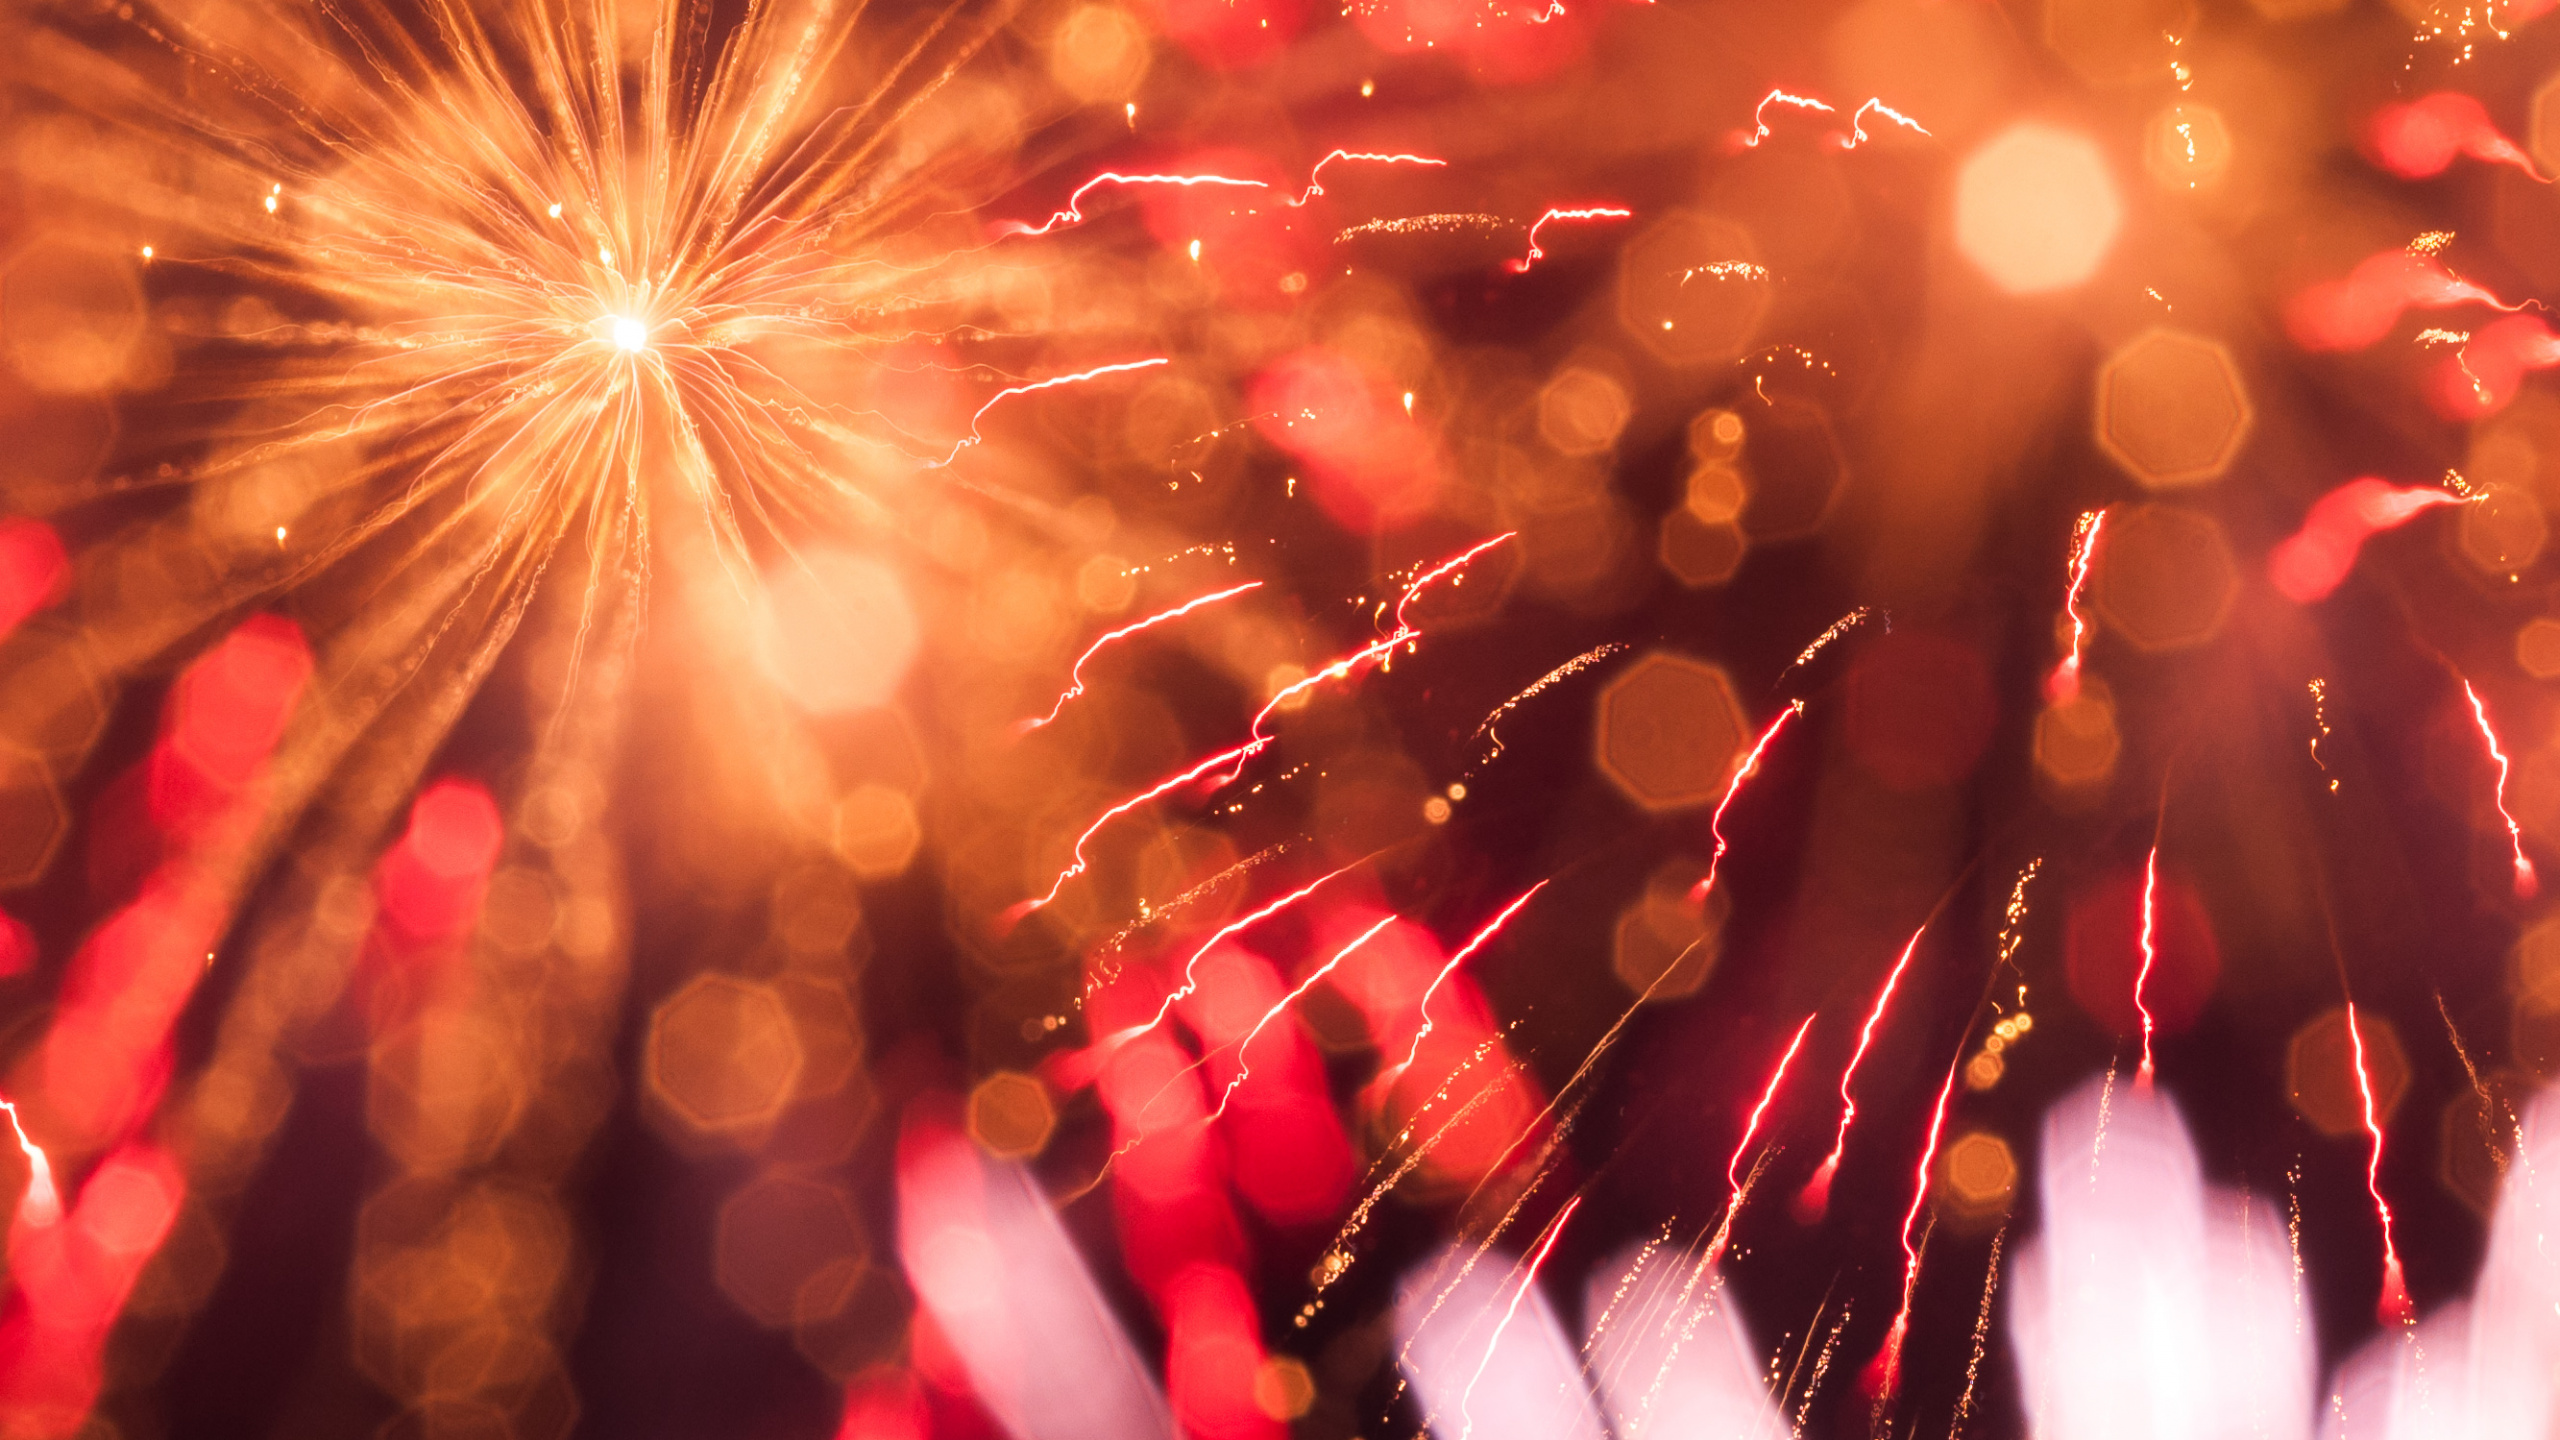 Fireworks, Sparkler, New Years Day, Red, Light. Wallpaper in 2560x1440 Resolution